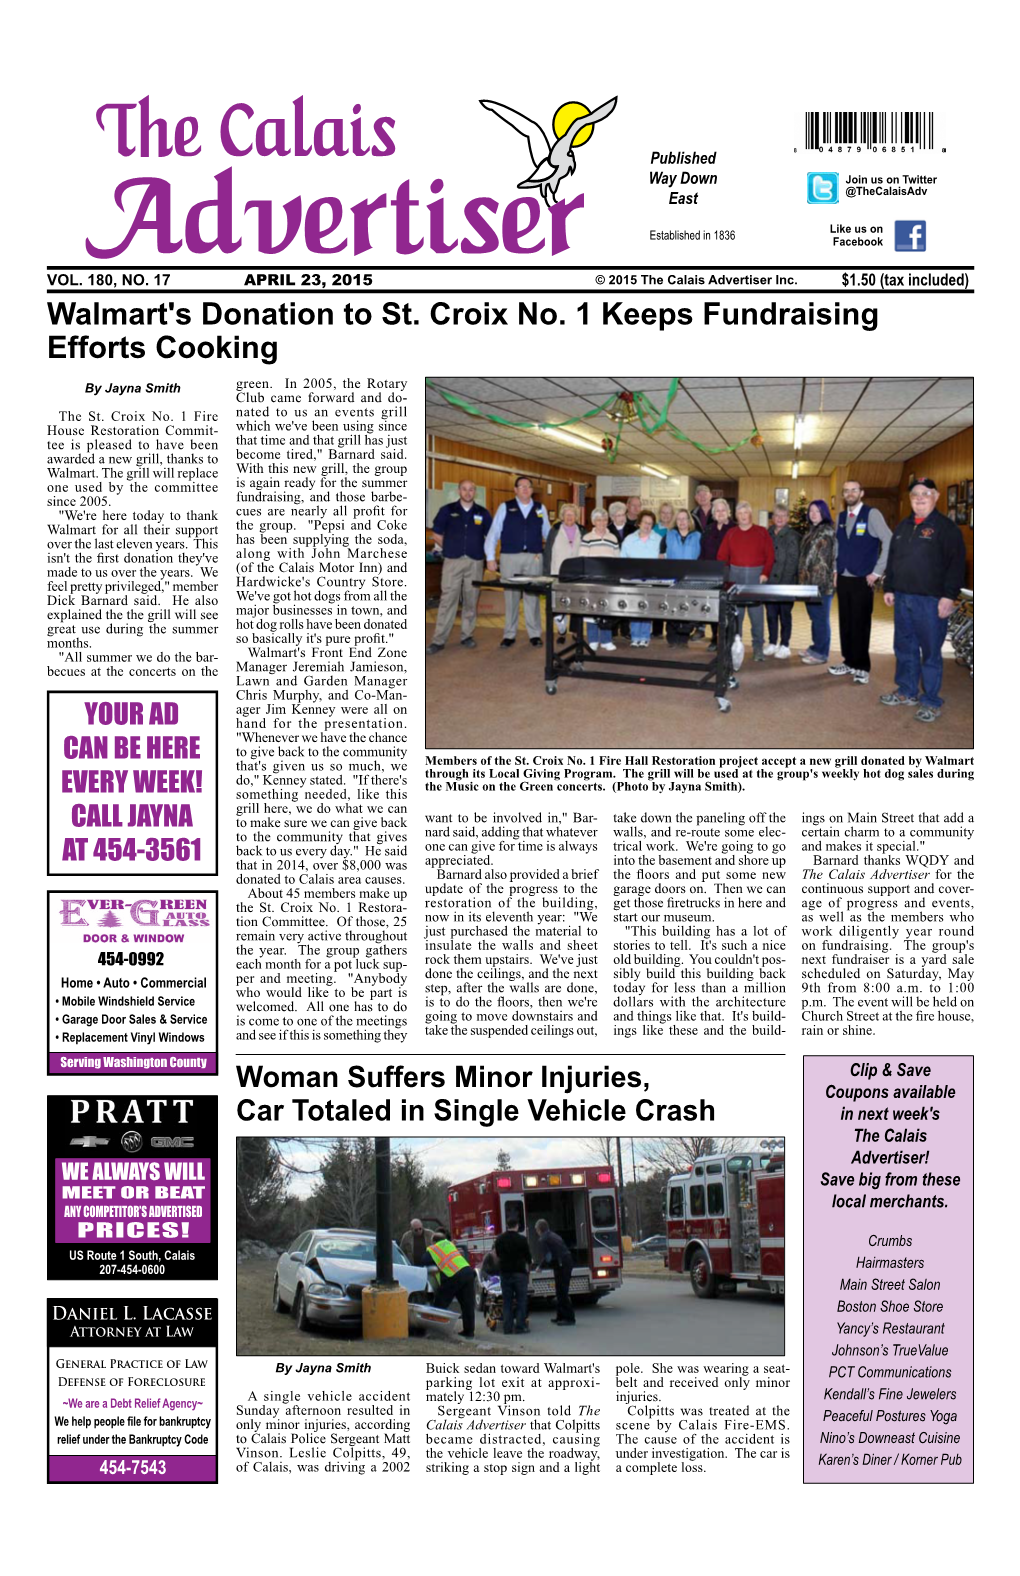 View April 23, 2015 Issue